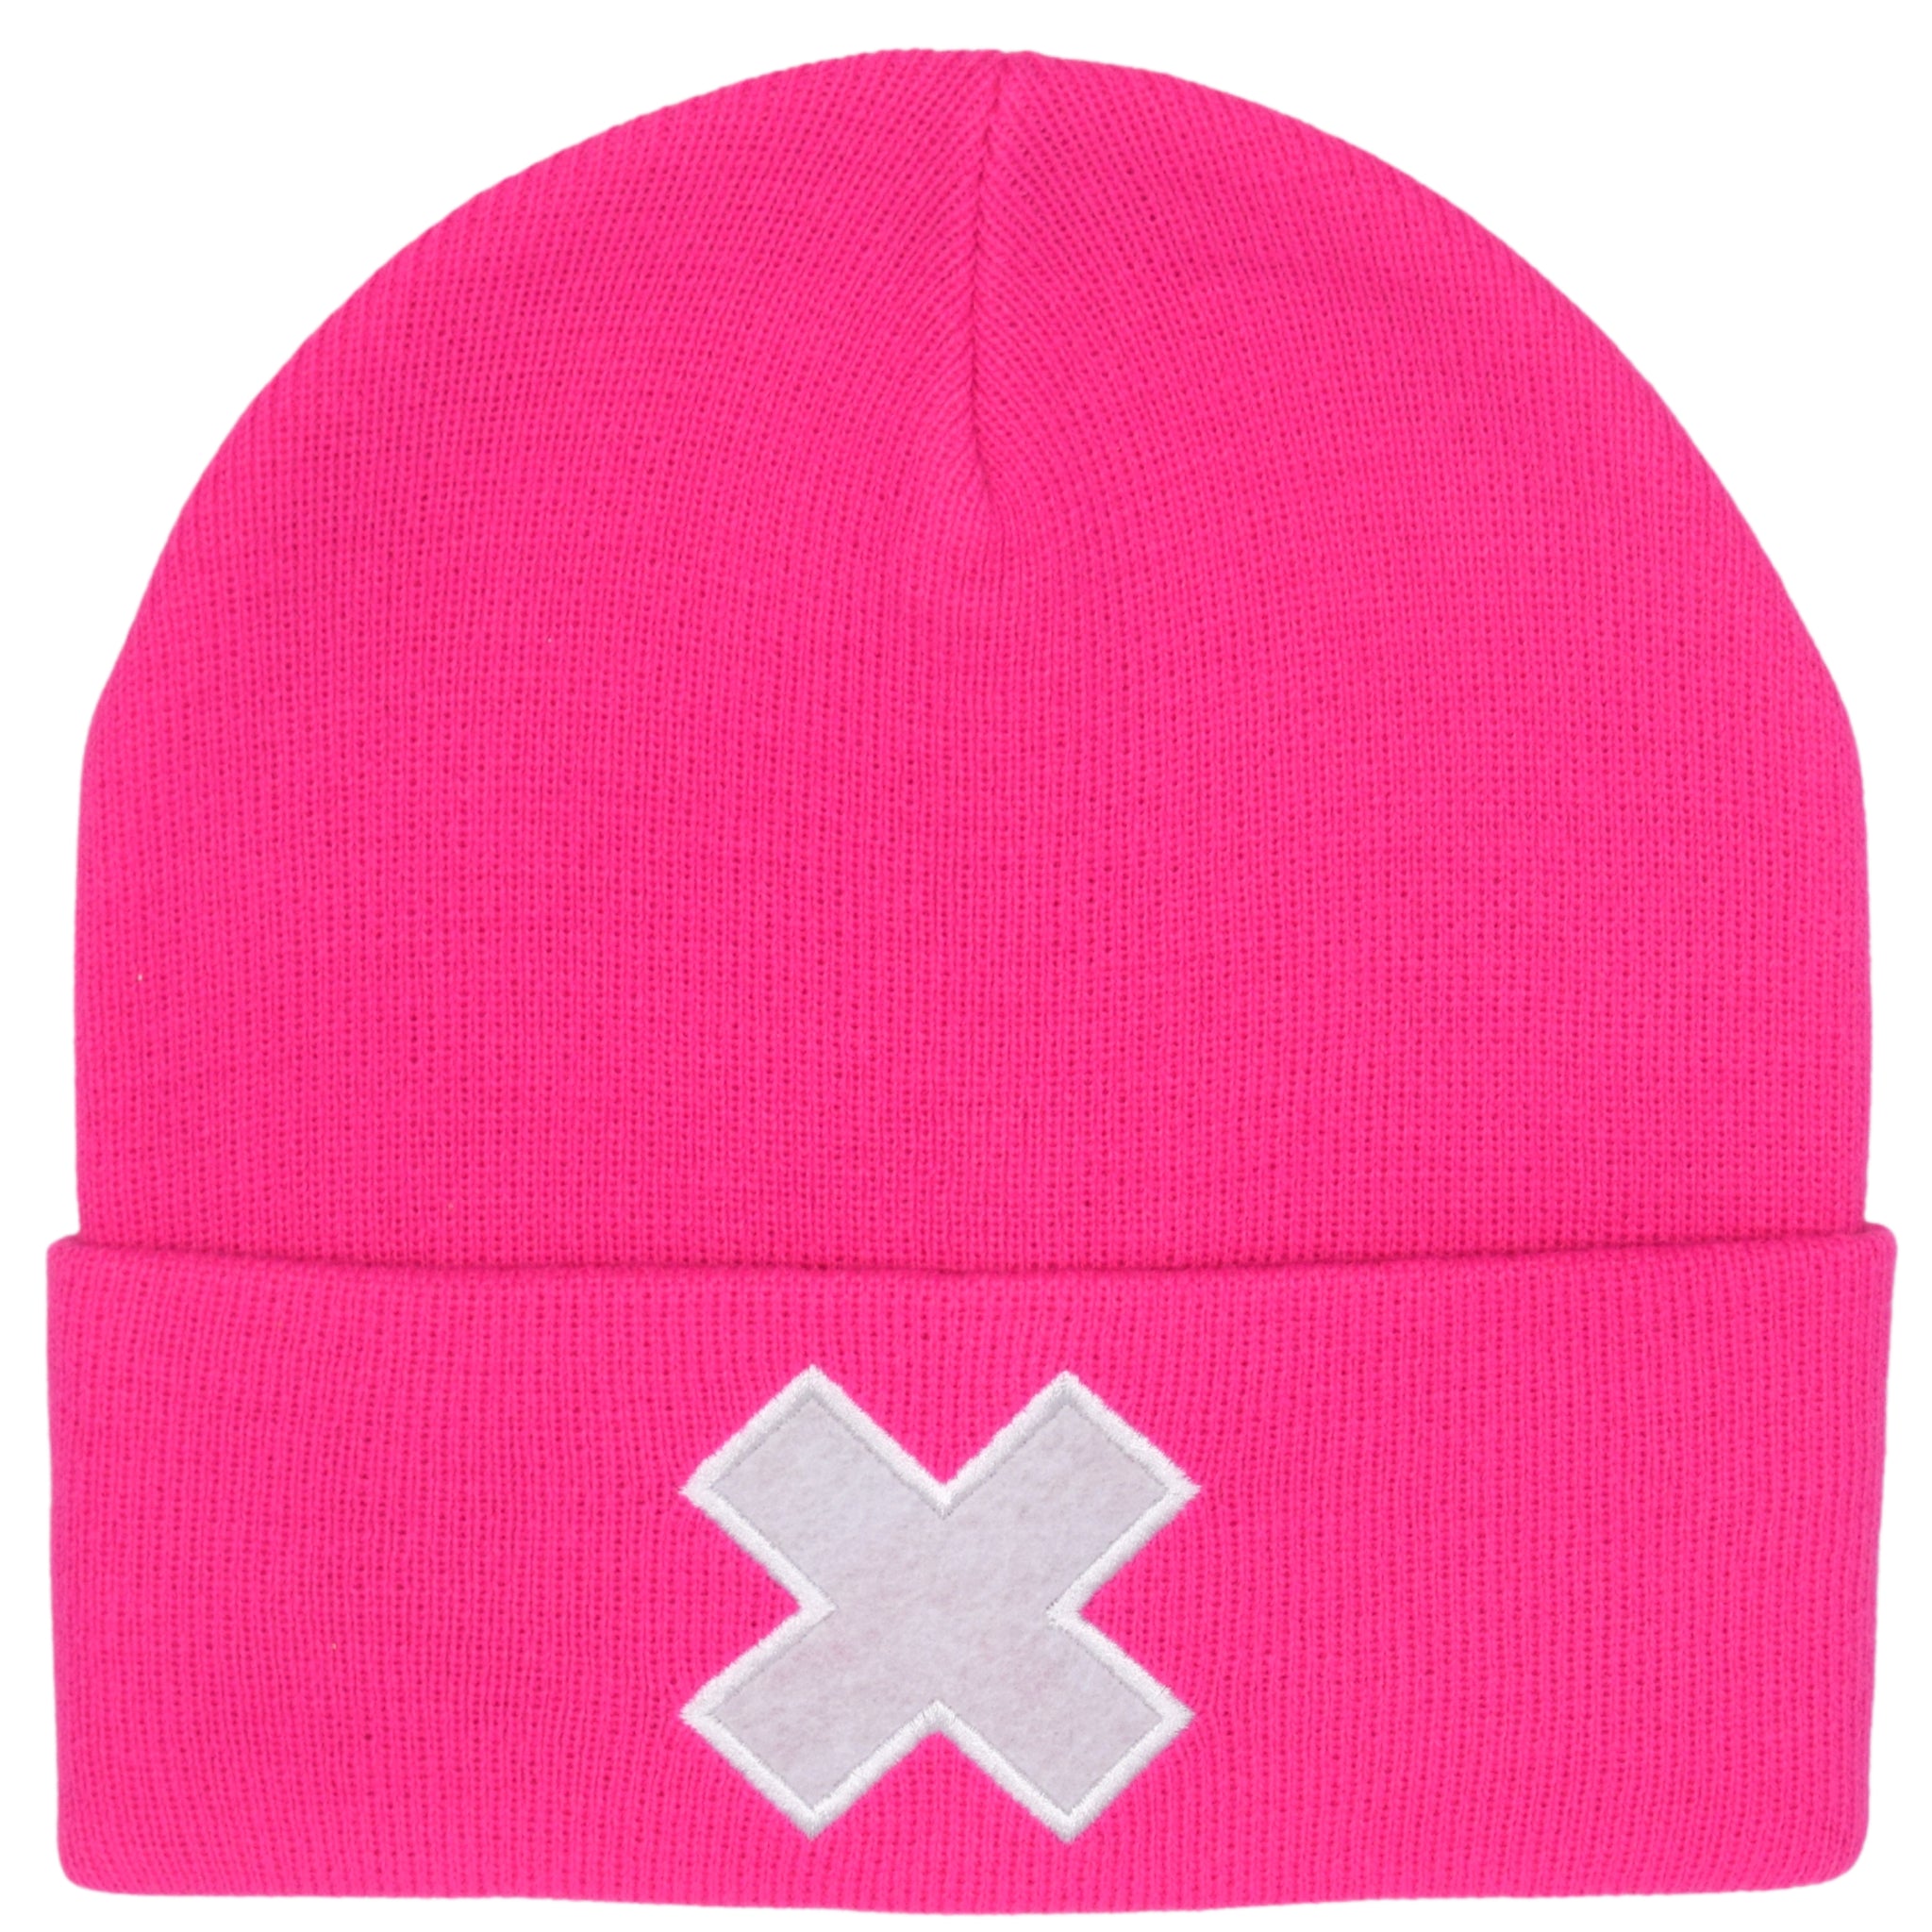 Cotton Candy Lover Beanie